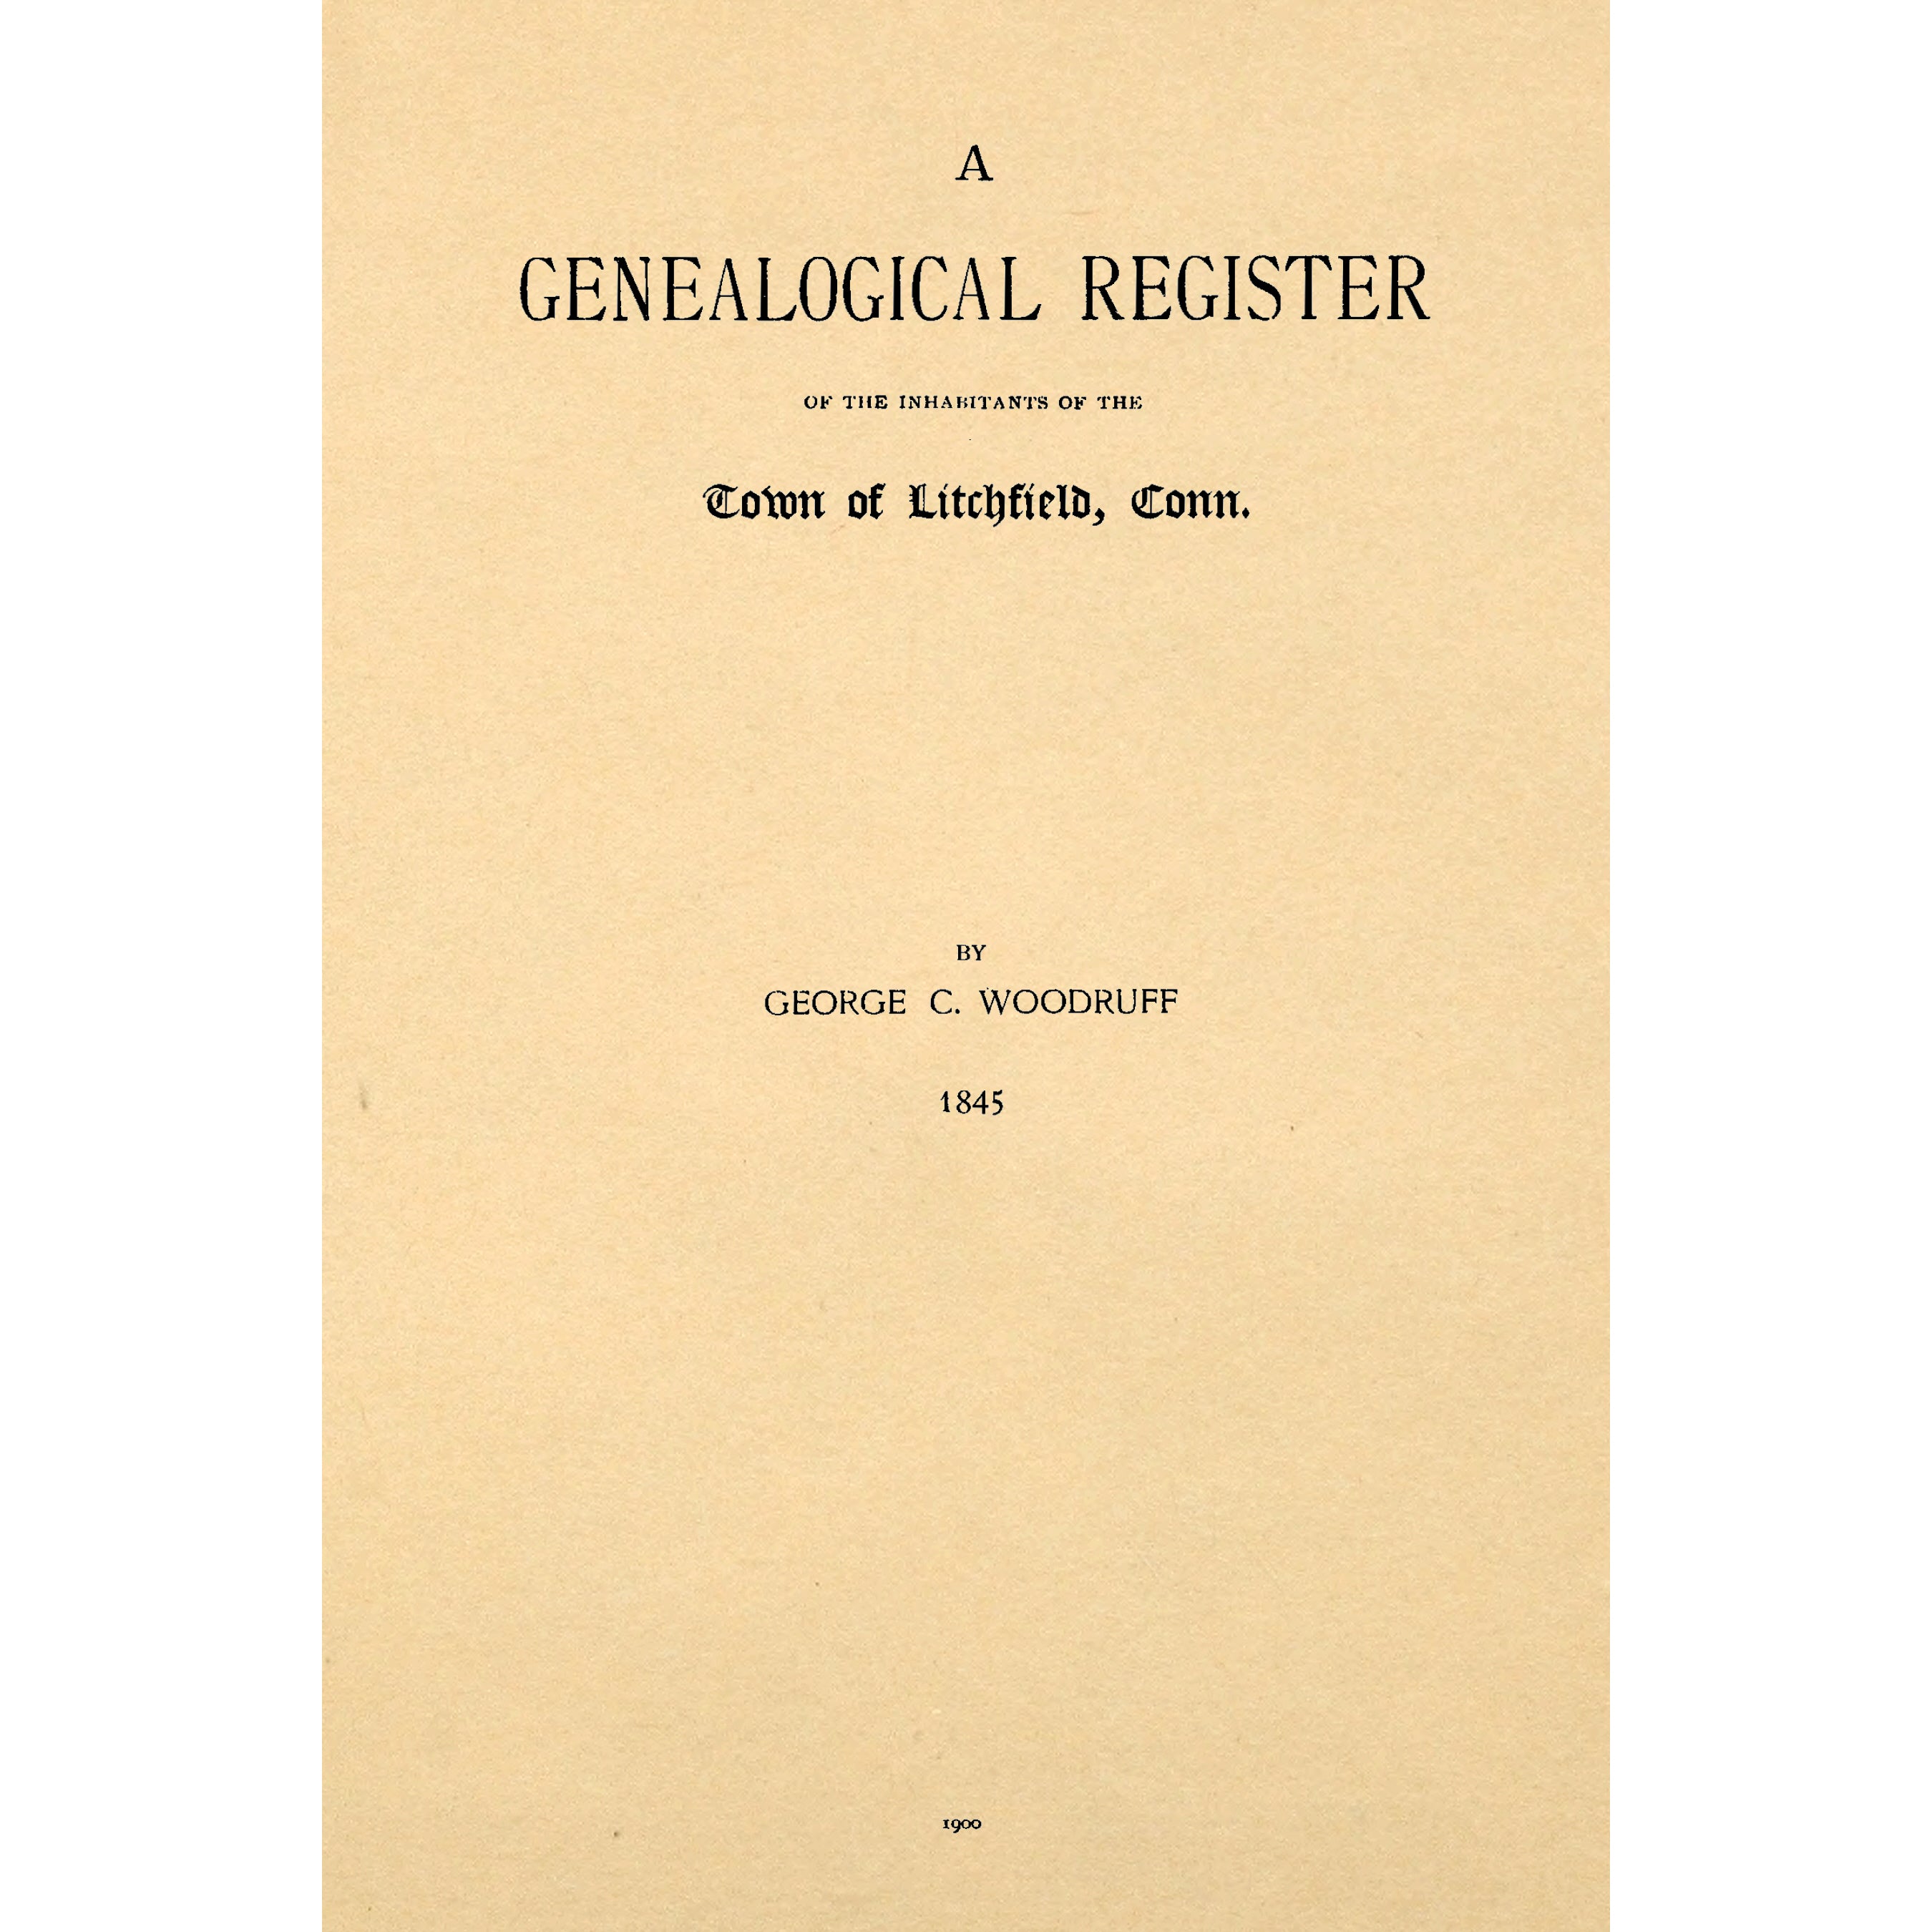 A Genealogical Register Of The Inhabitants Of The Town of Litchfield, Conn.,